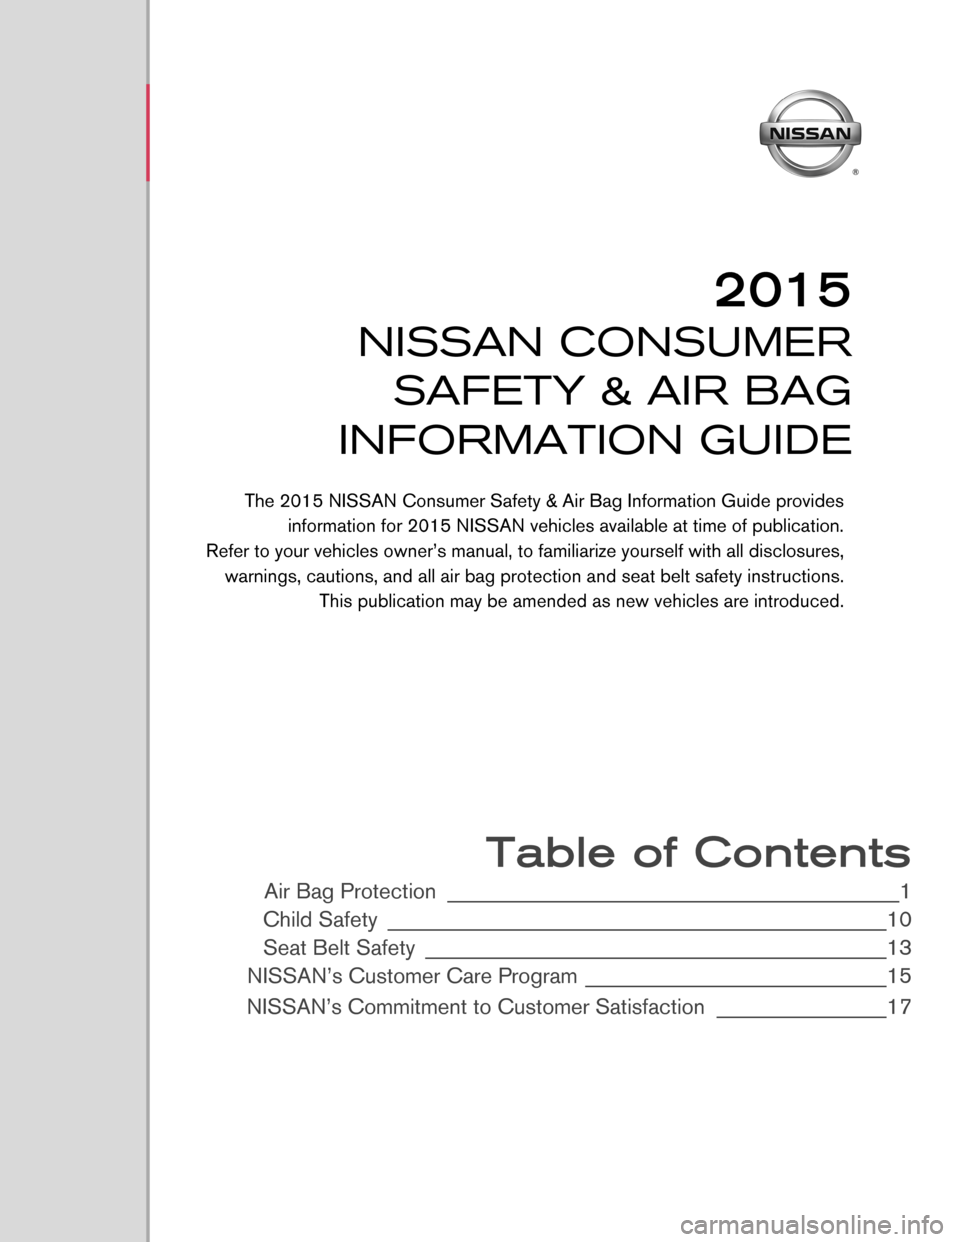 NISSAN 370Z COUPE 2015 Z34 Consumer Safety Air Bag Information Guide 